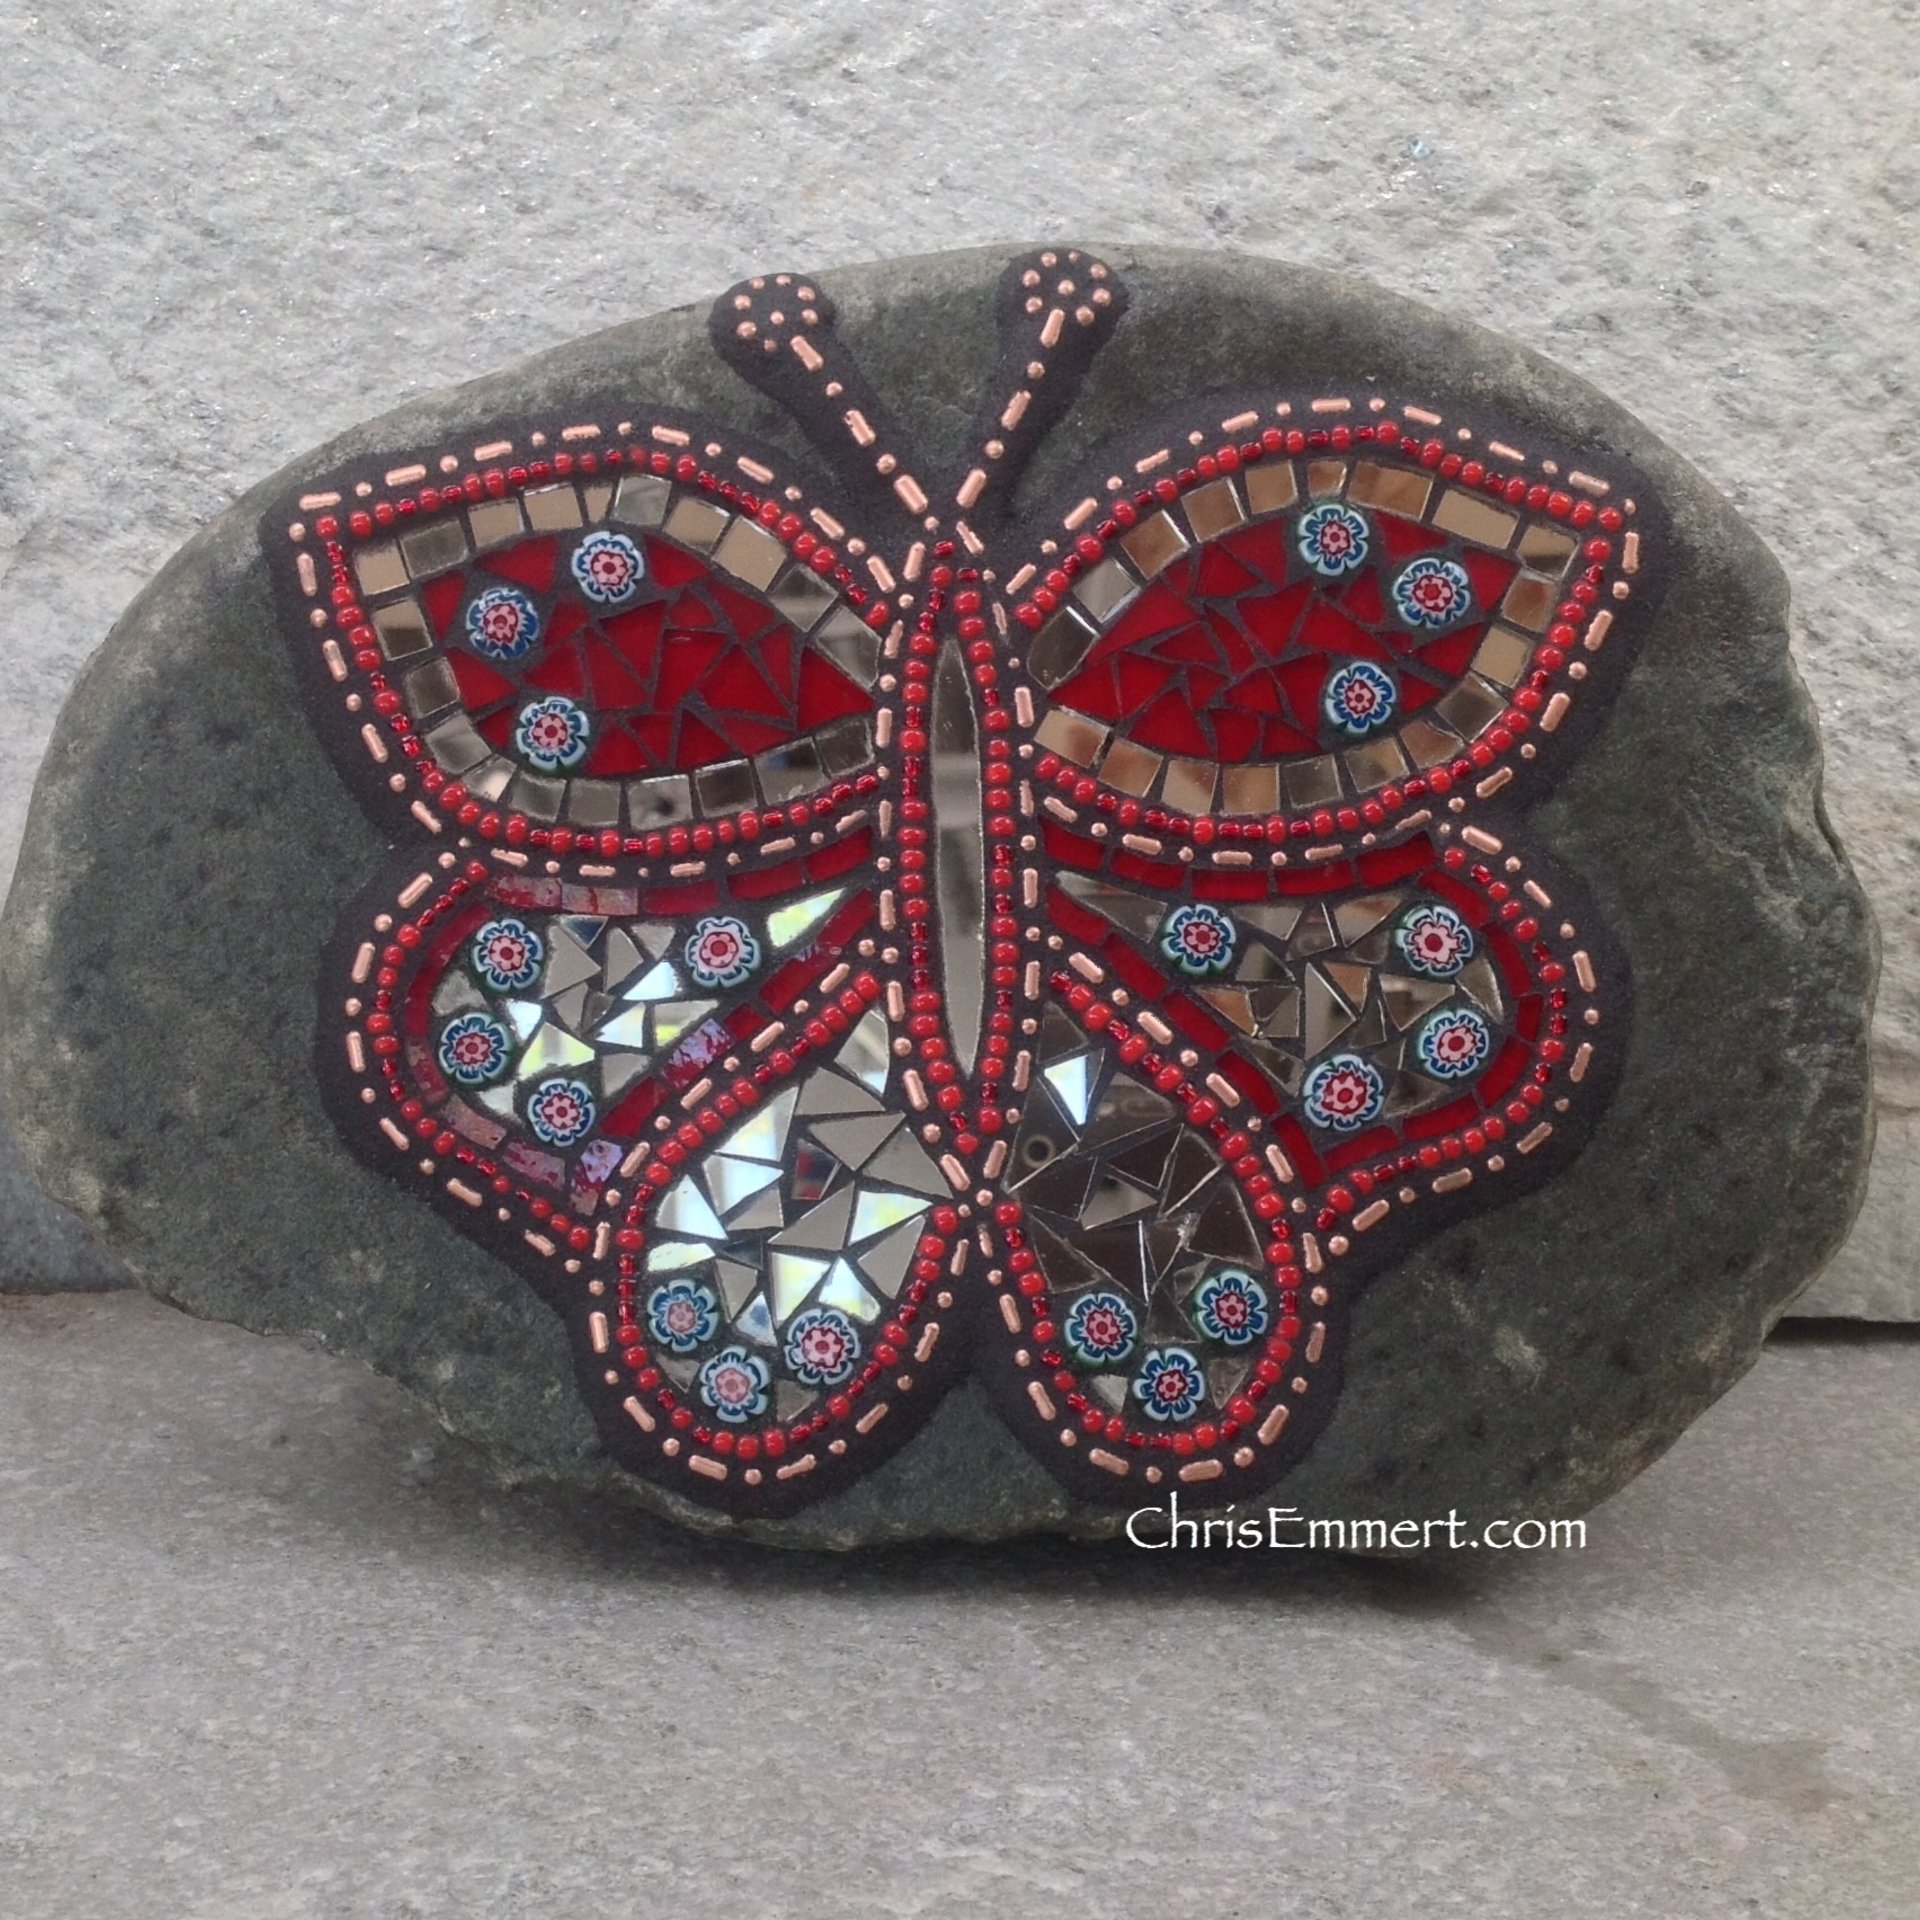 Copper, Red and Bronze Mirror Butterfly Mosaic -Garden Stone